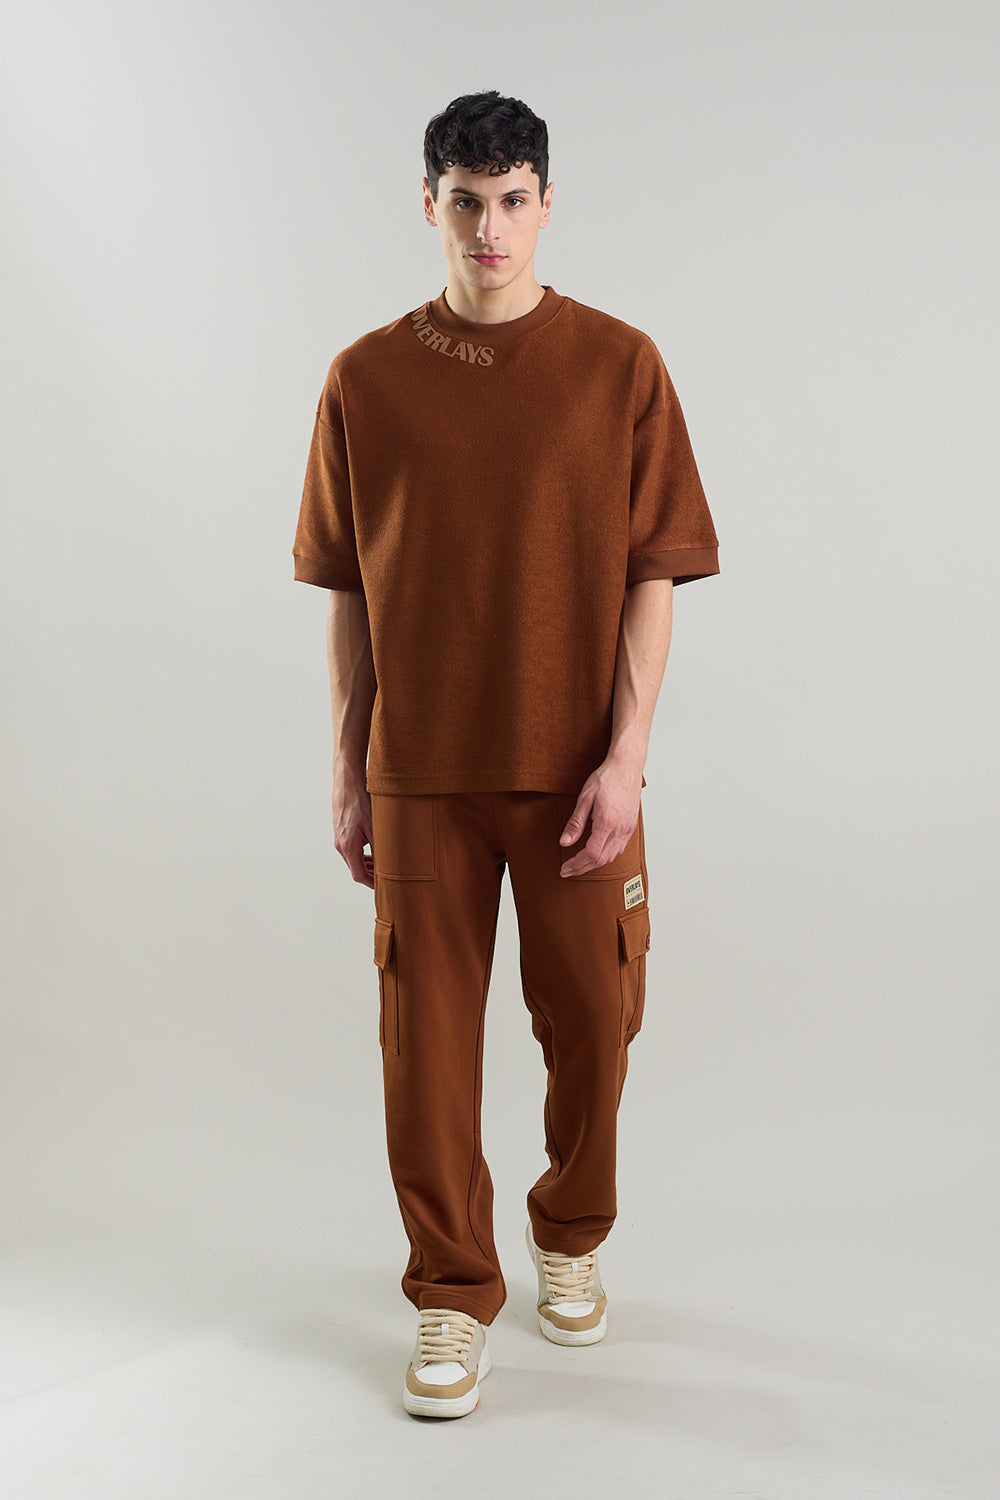 Textured Arc Brown Oversized Fit T-shirt